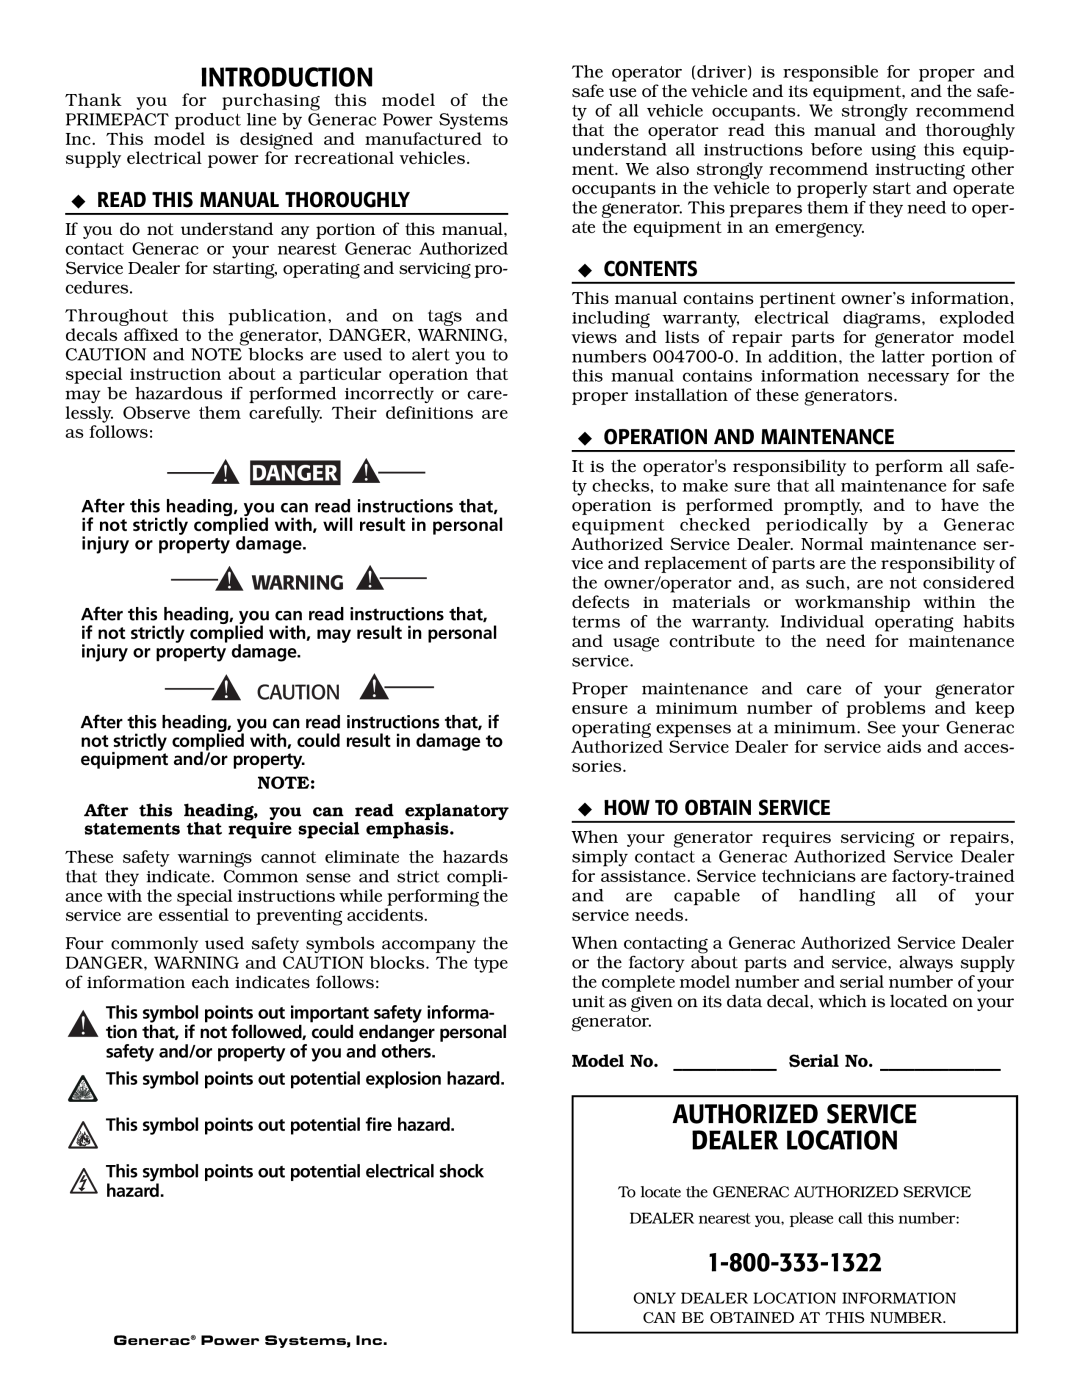 Generac 004700-0 Introduction, Authorized Service Dealer Location, Read This Manual Thoroughly, Danger, Contents 